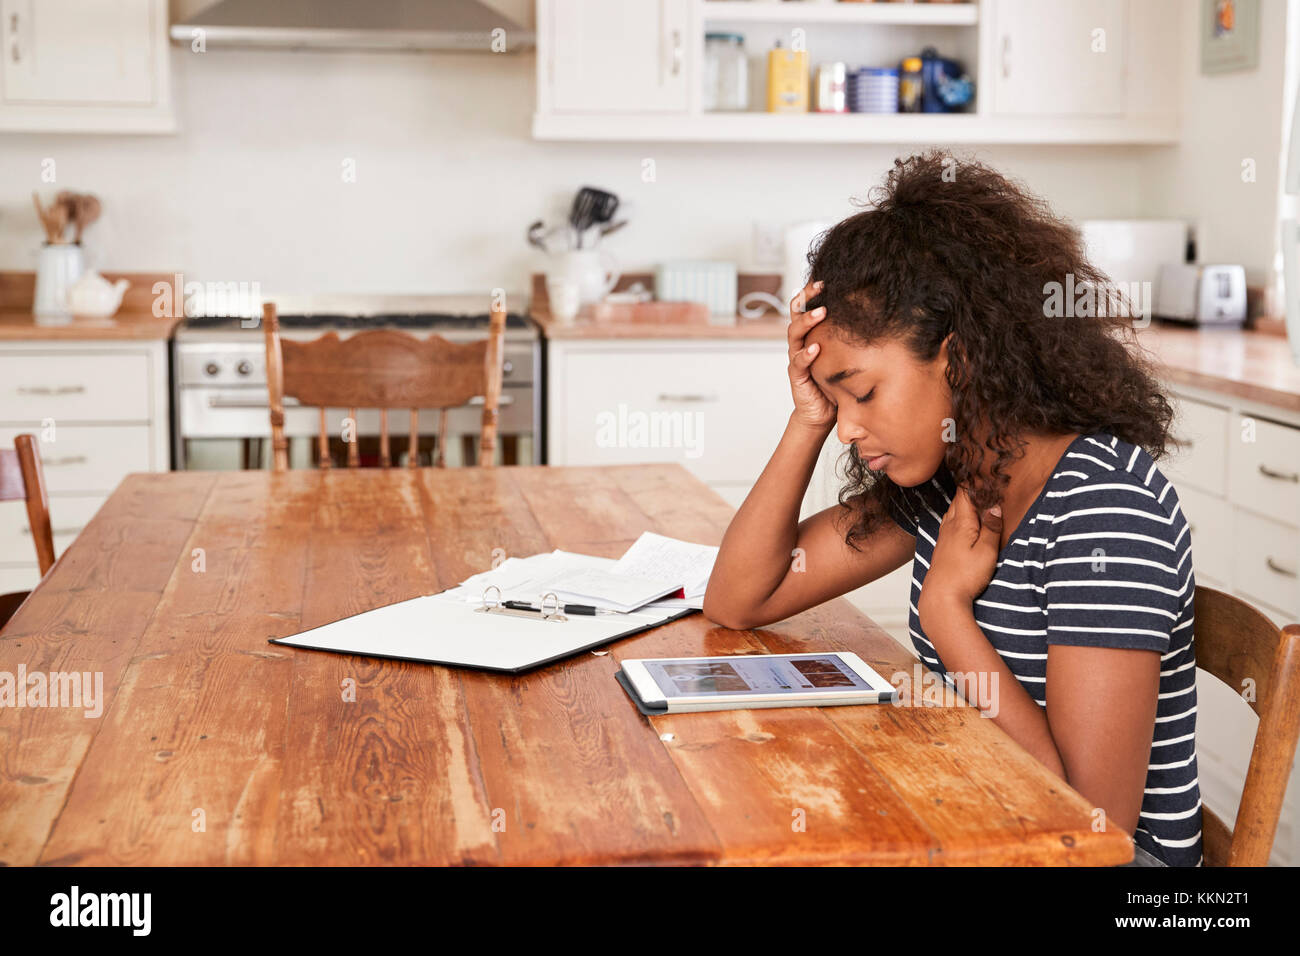 Teenage Girl At Home Using Digital Tablet Being Bullied On Line Stock Photo